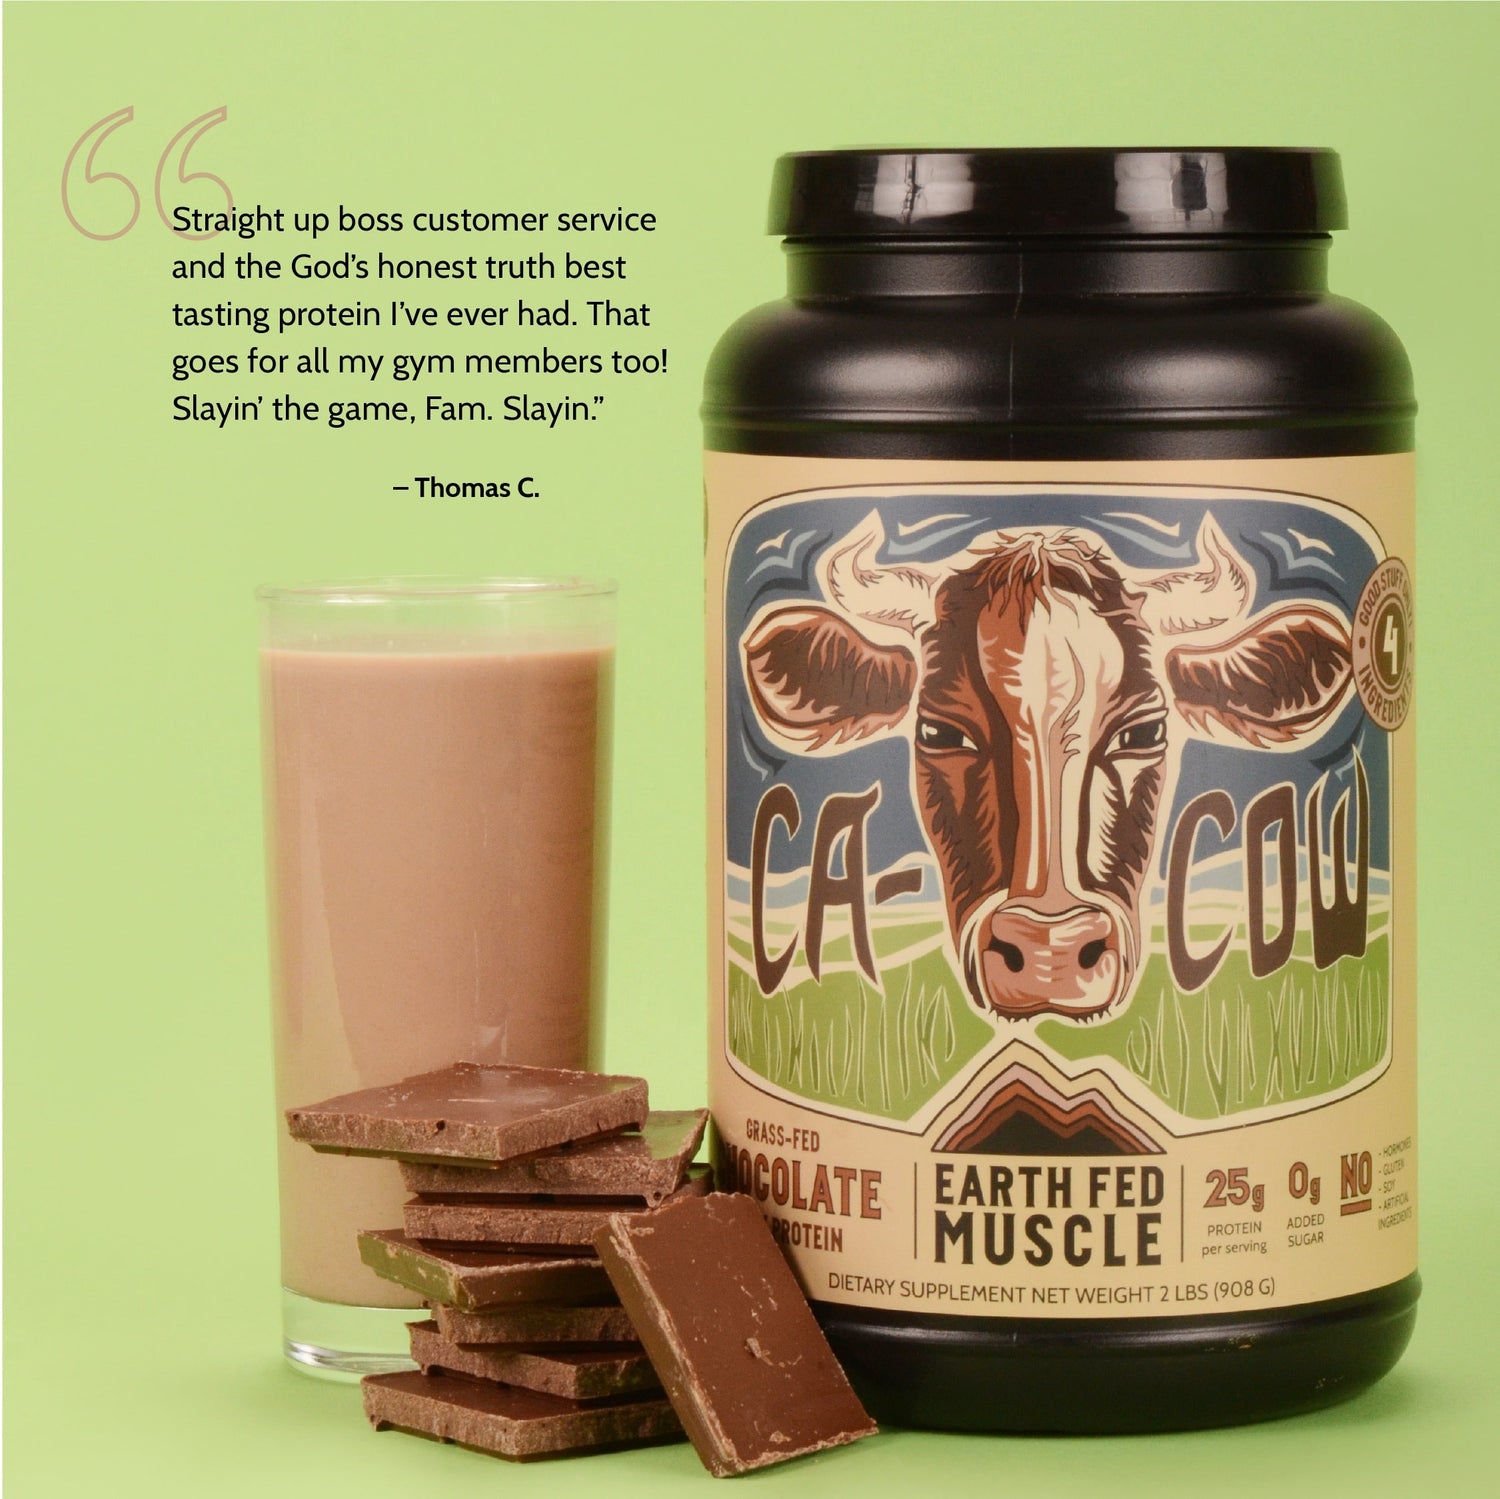 Ca-Cow Earth Fed Muscle Protein Customer Review